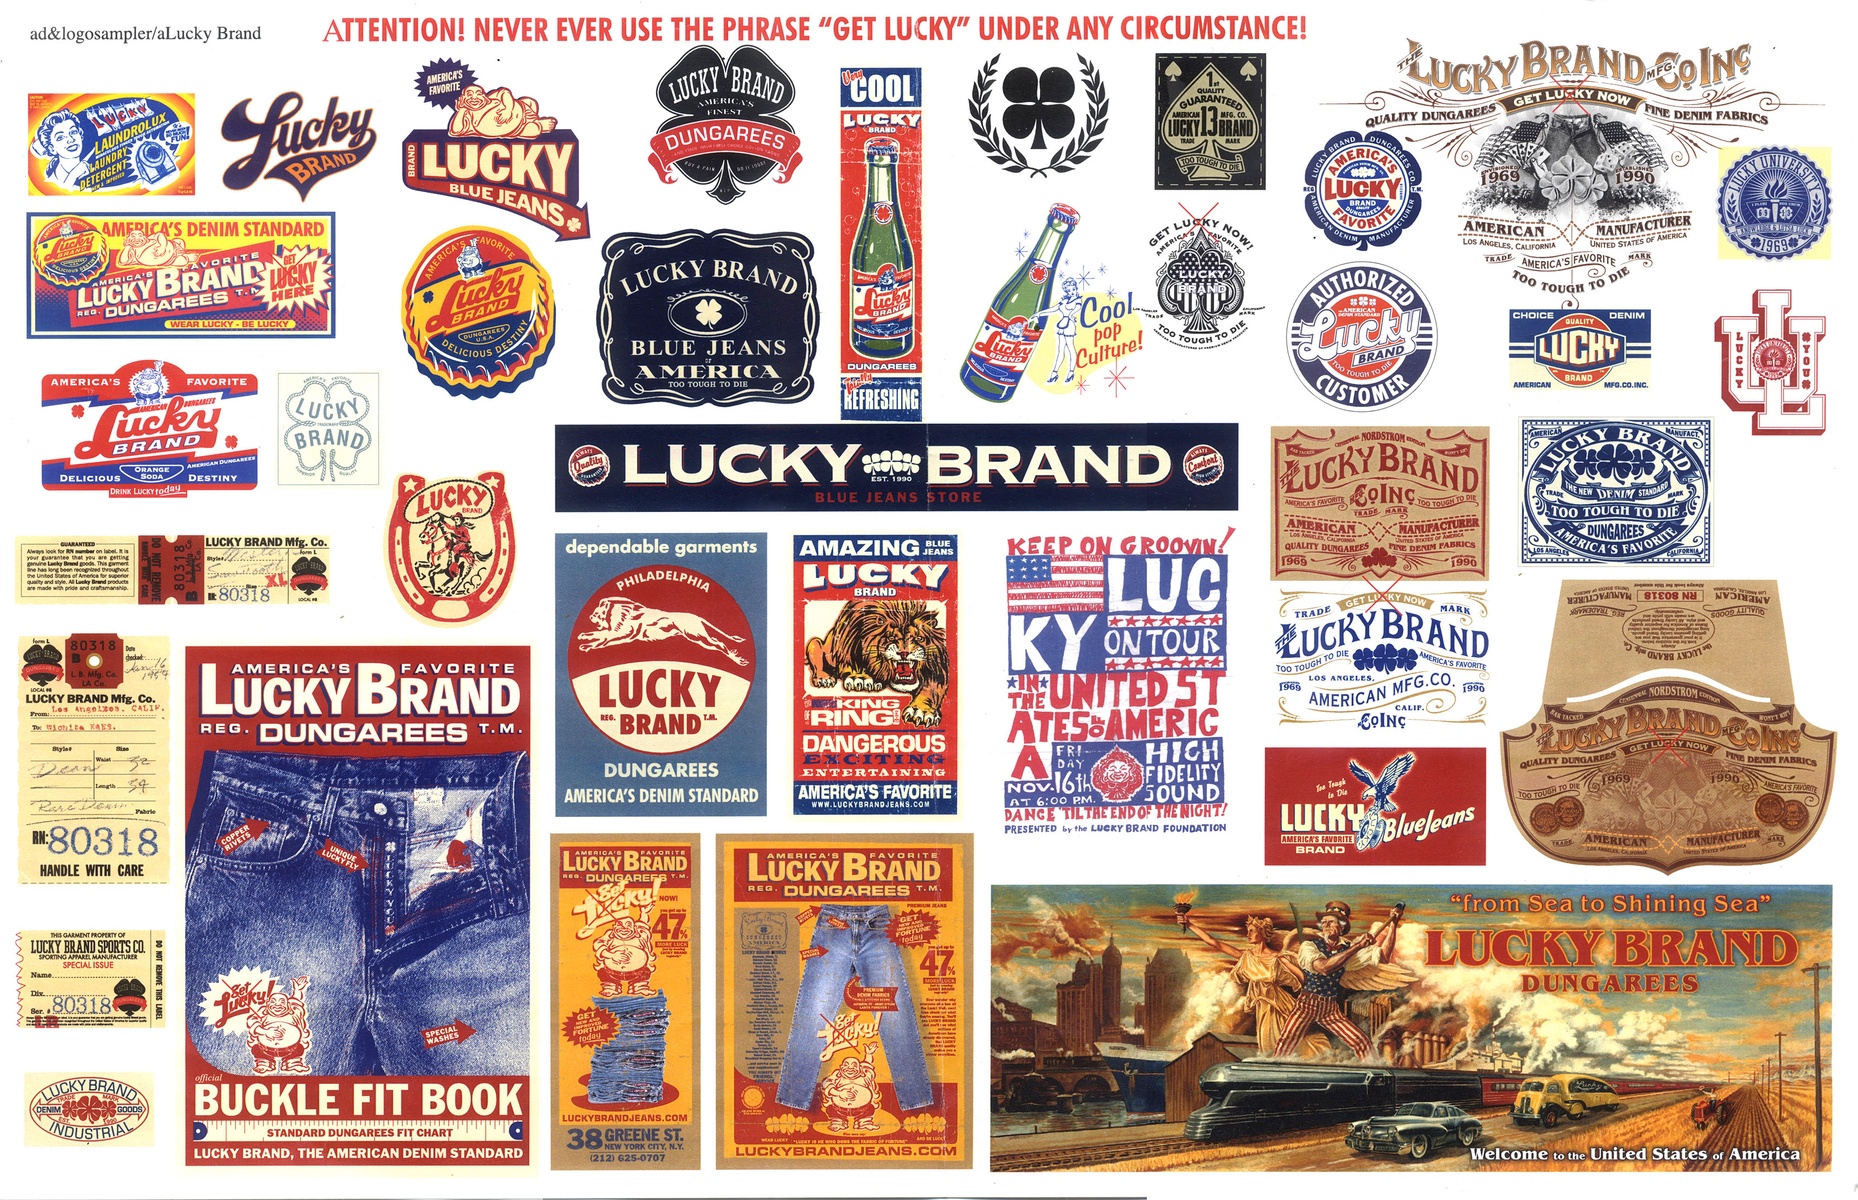 Sample of early work for Lucky Brand when I had my hands on everything from Product to Advertising. It shows a unity of hand before things got corporatized and compartmentalized